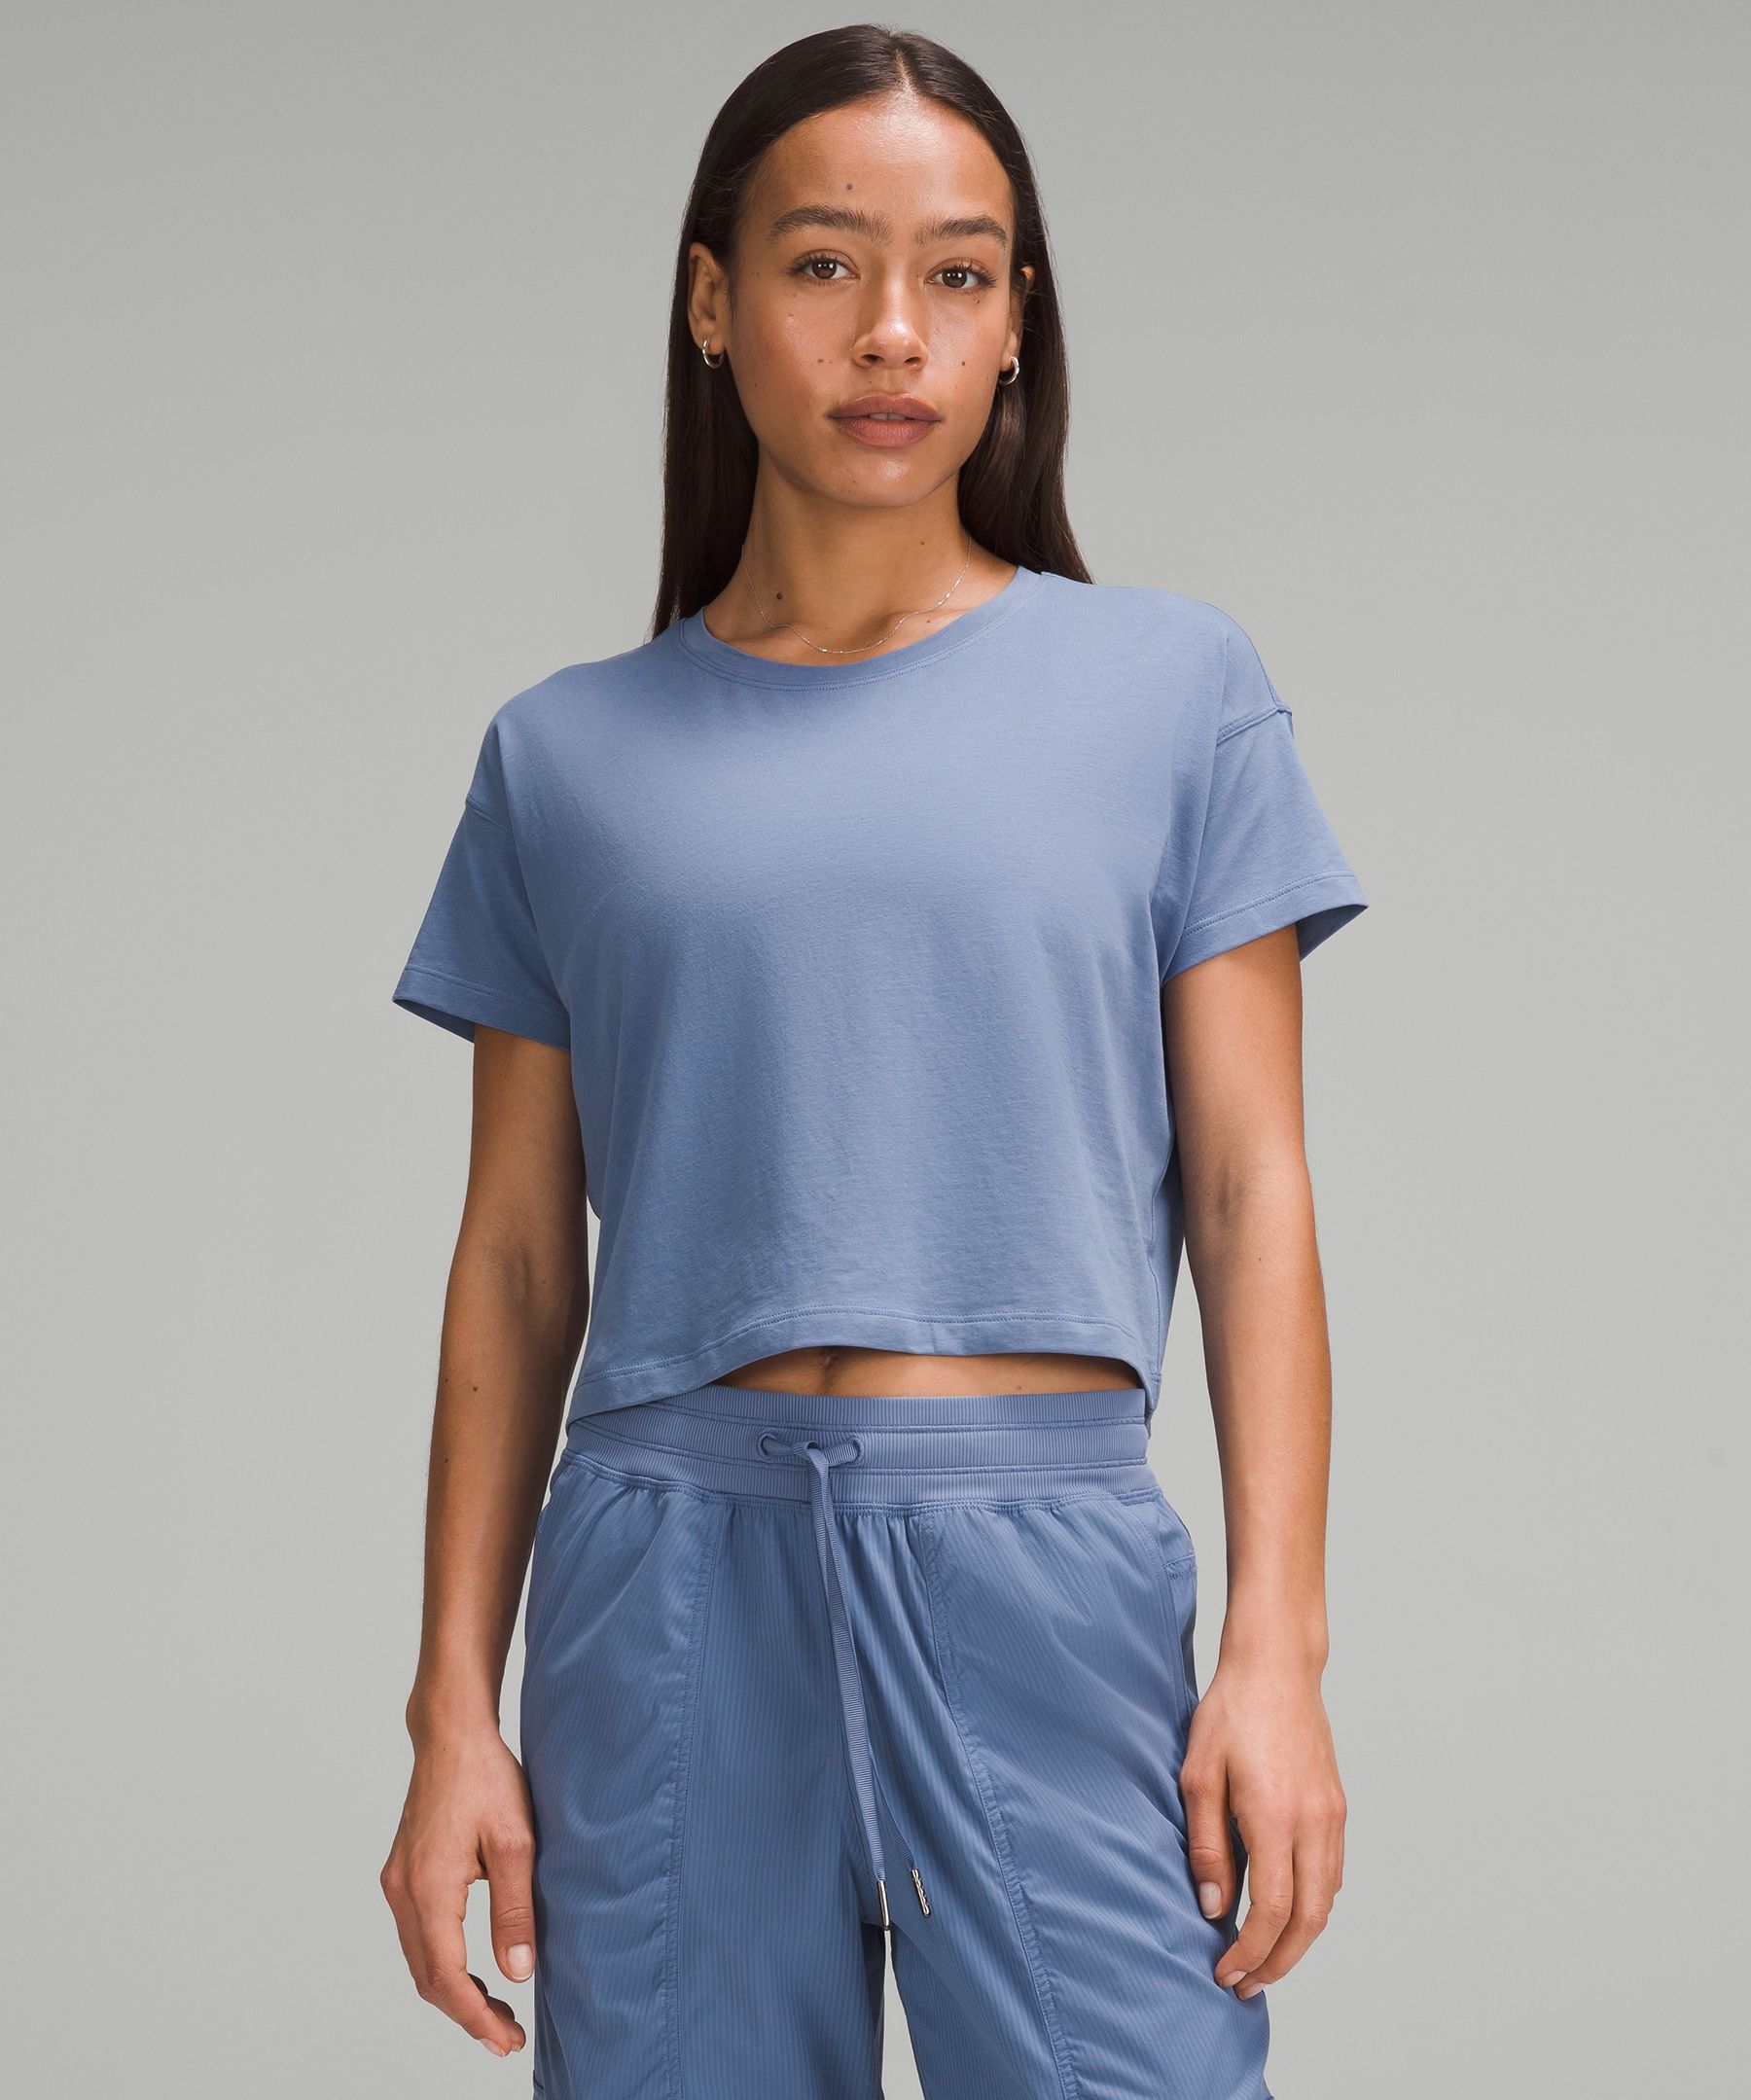 Lululemon Cates Cropped T-shirt In Blue